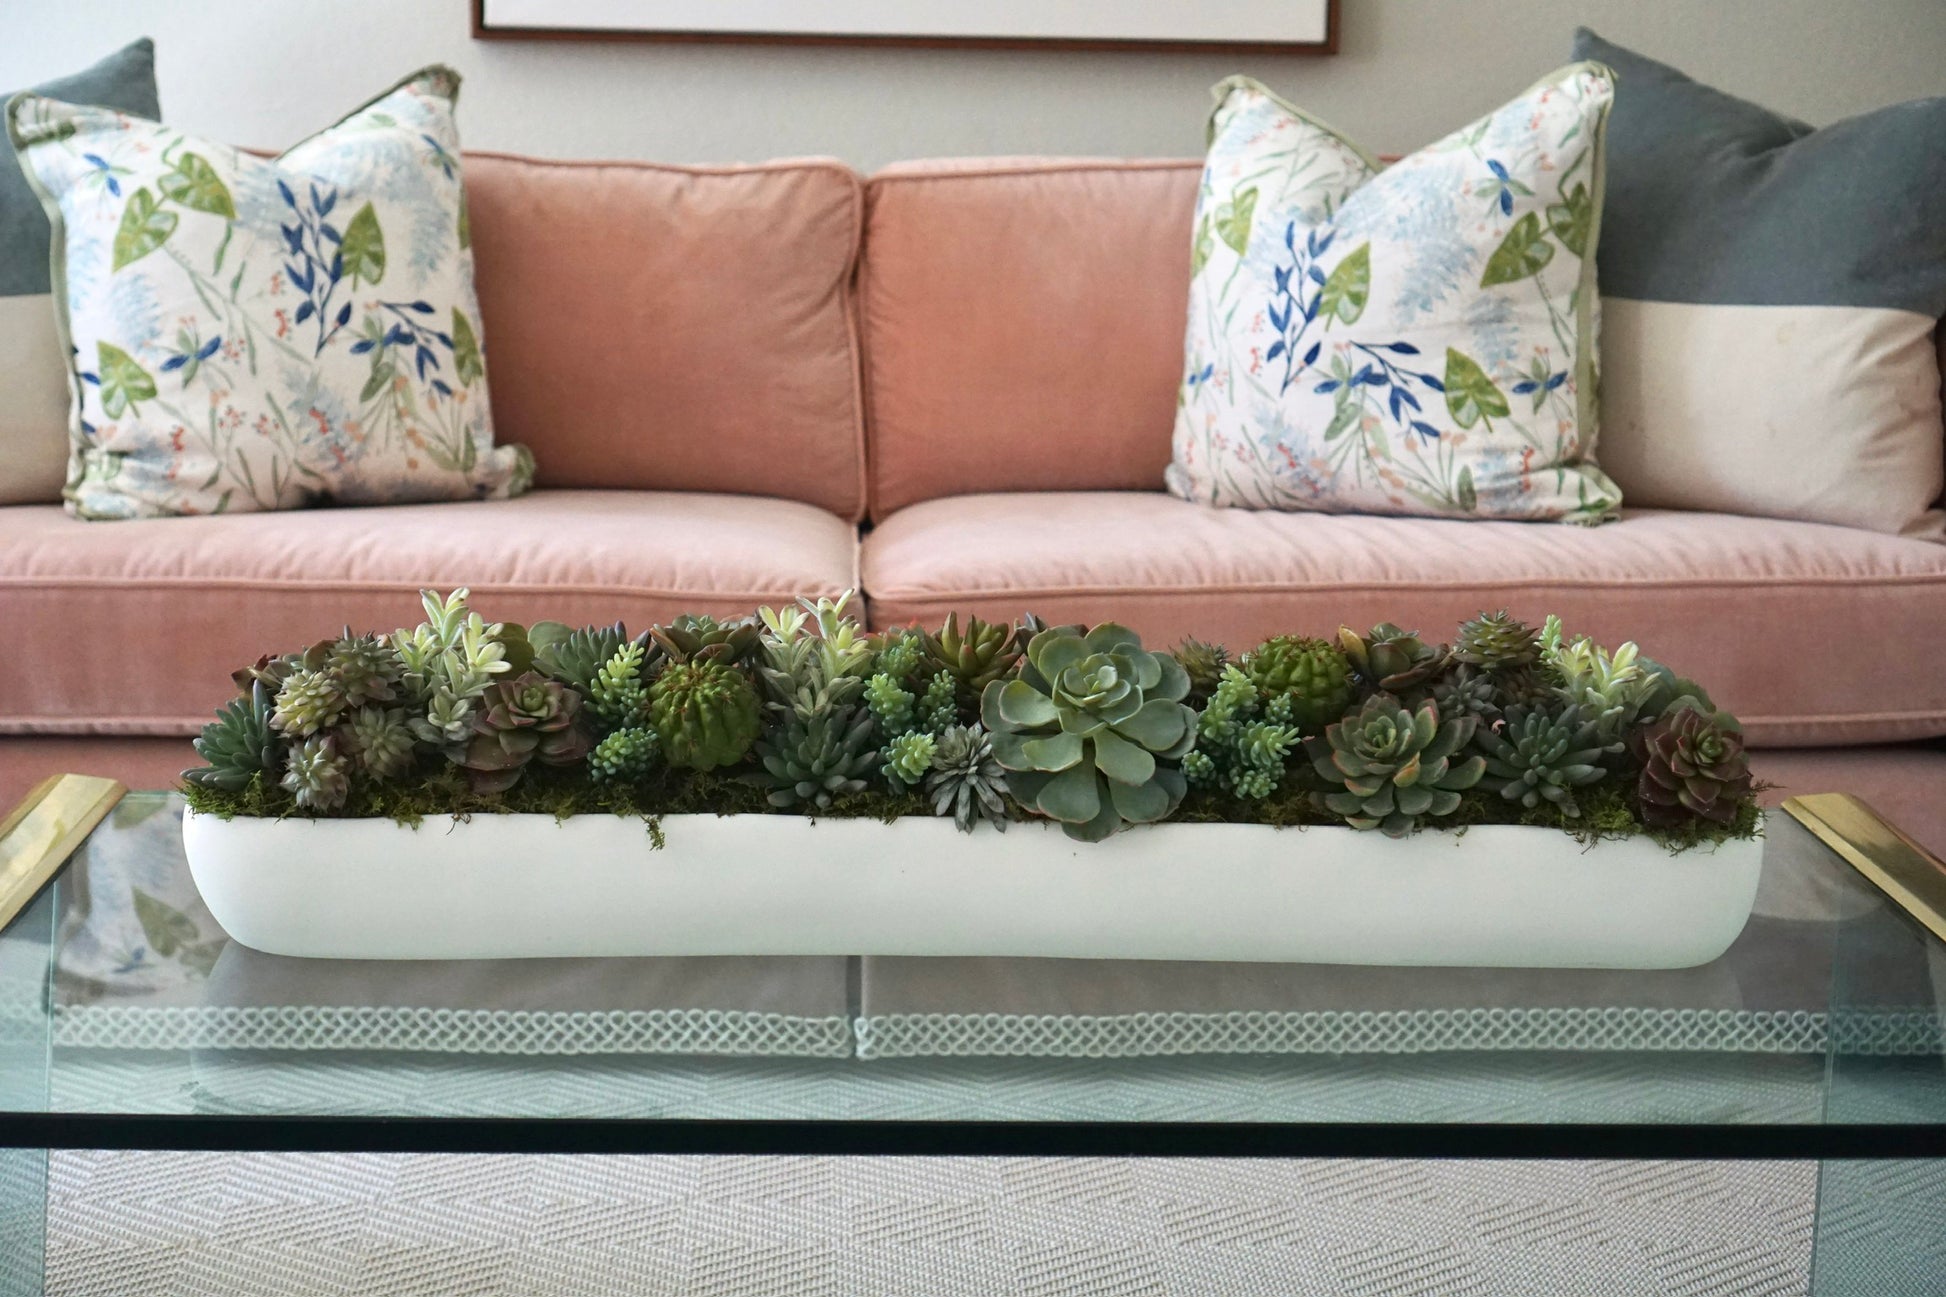 A long, elegant design of all faux succulents. A statement piece for a coffee table or dining room table.